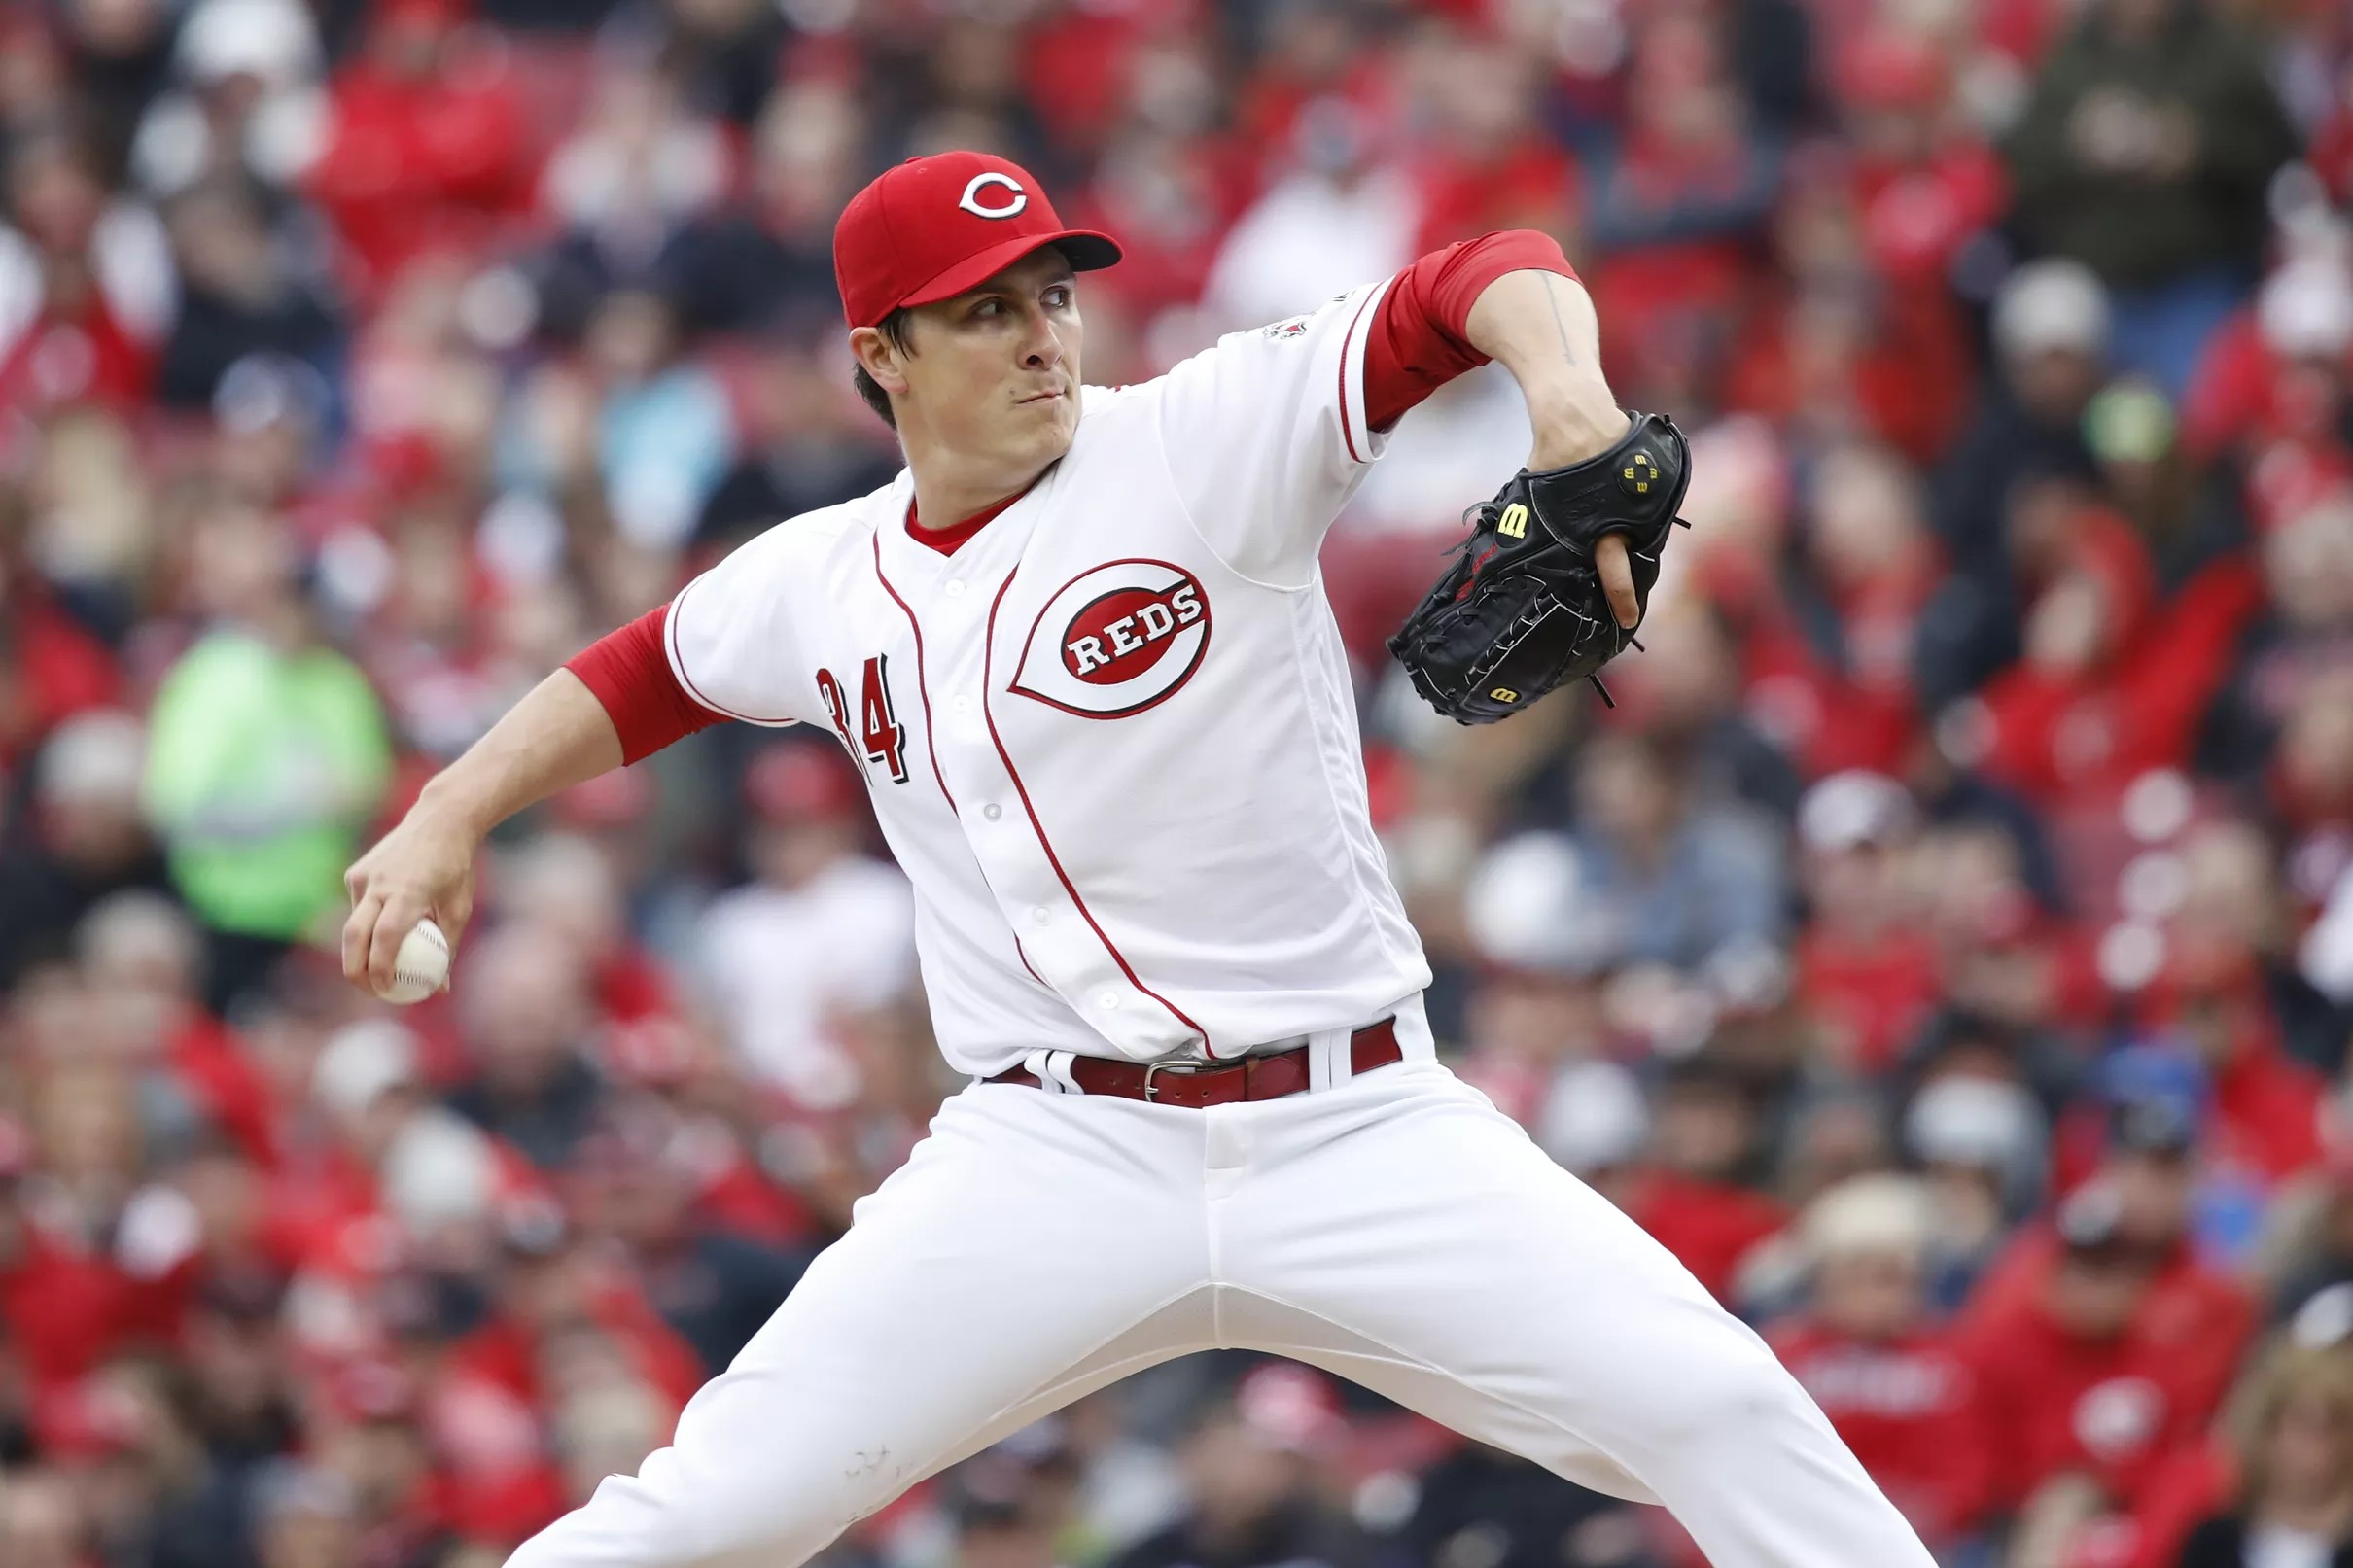 Reds at Pirates, Game 1 Preview and Lineups